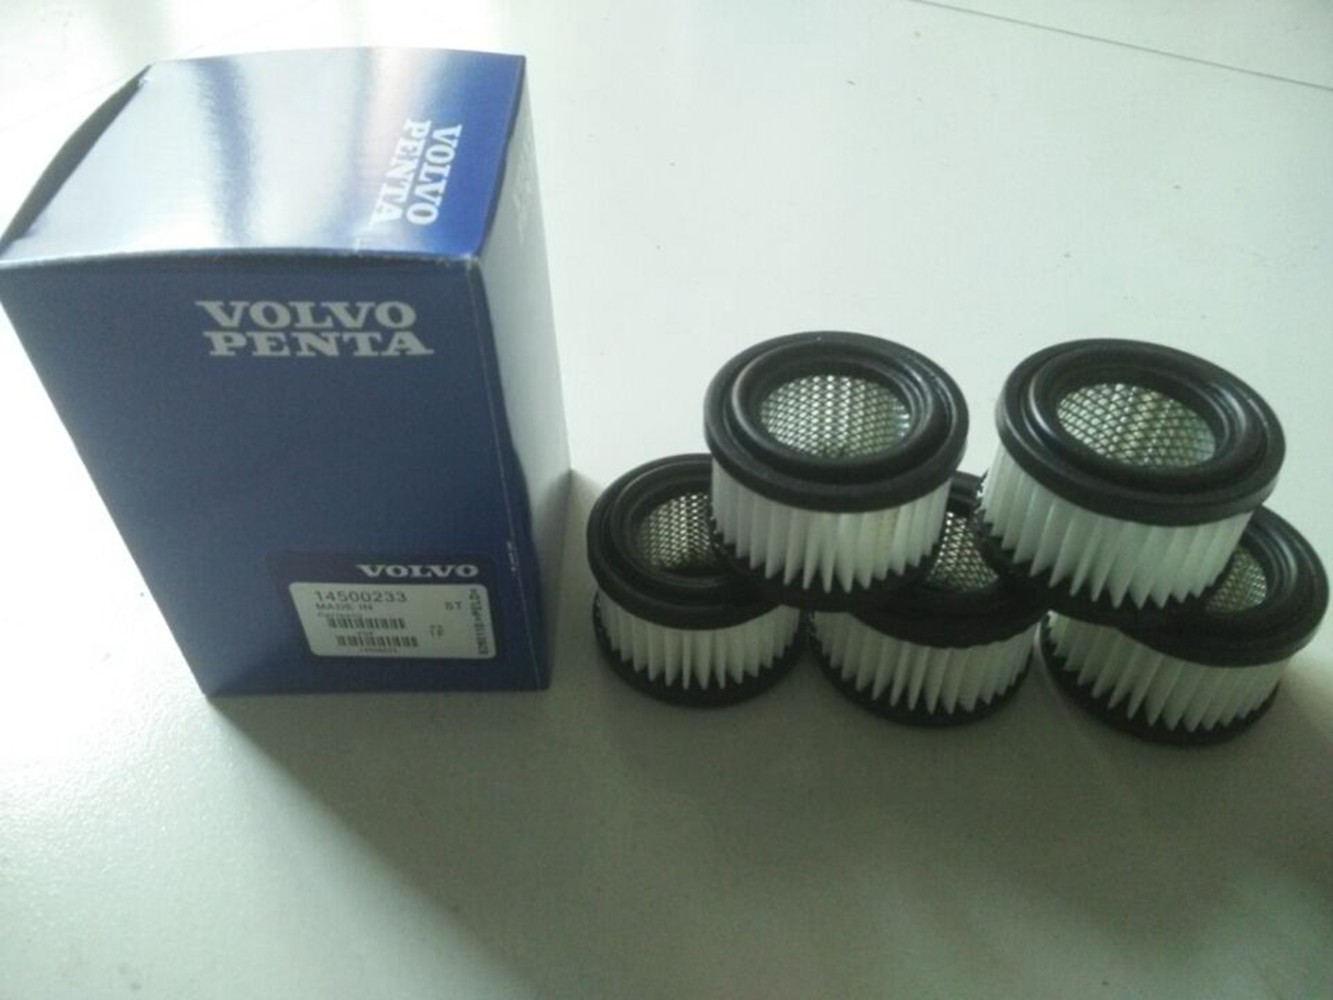 Construction Machinery Volvo Excavator Hydraulic Breather Filter 14500233 for sale